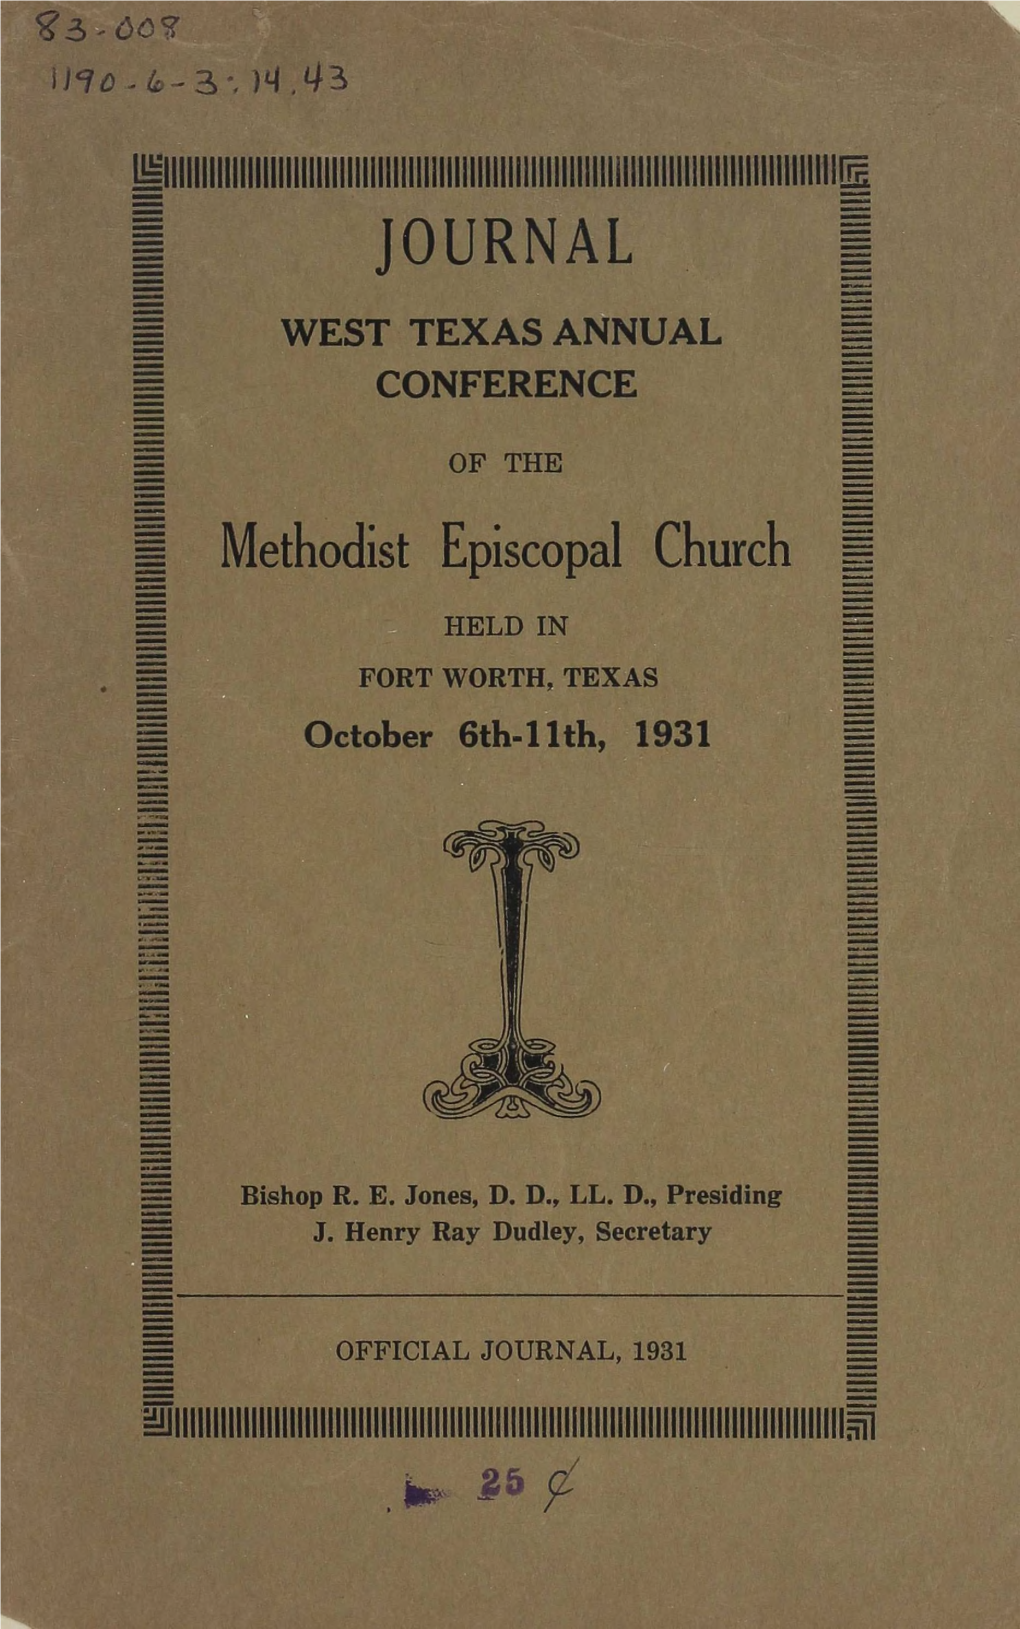 WEST TEXAS ANNUAL CONFERENCE October 6Th-Llth, 1931